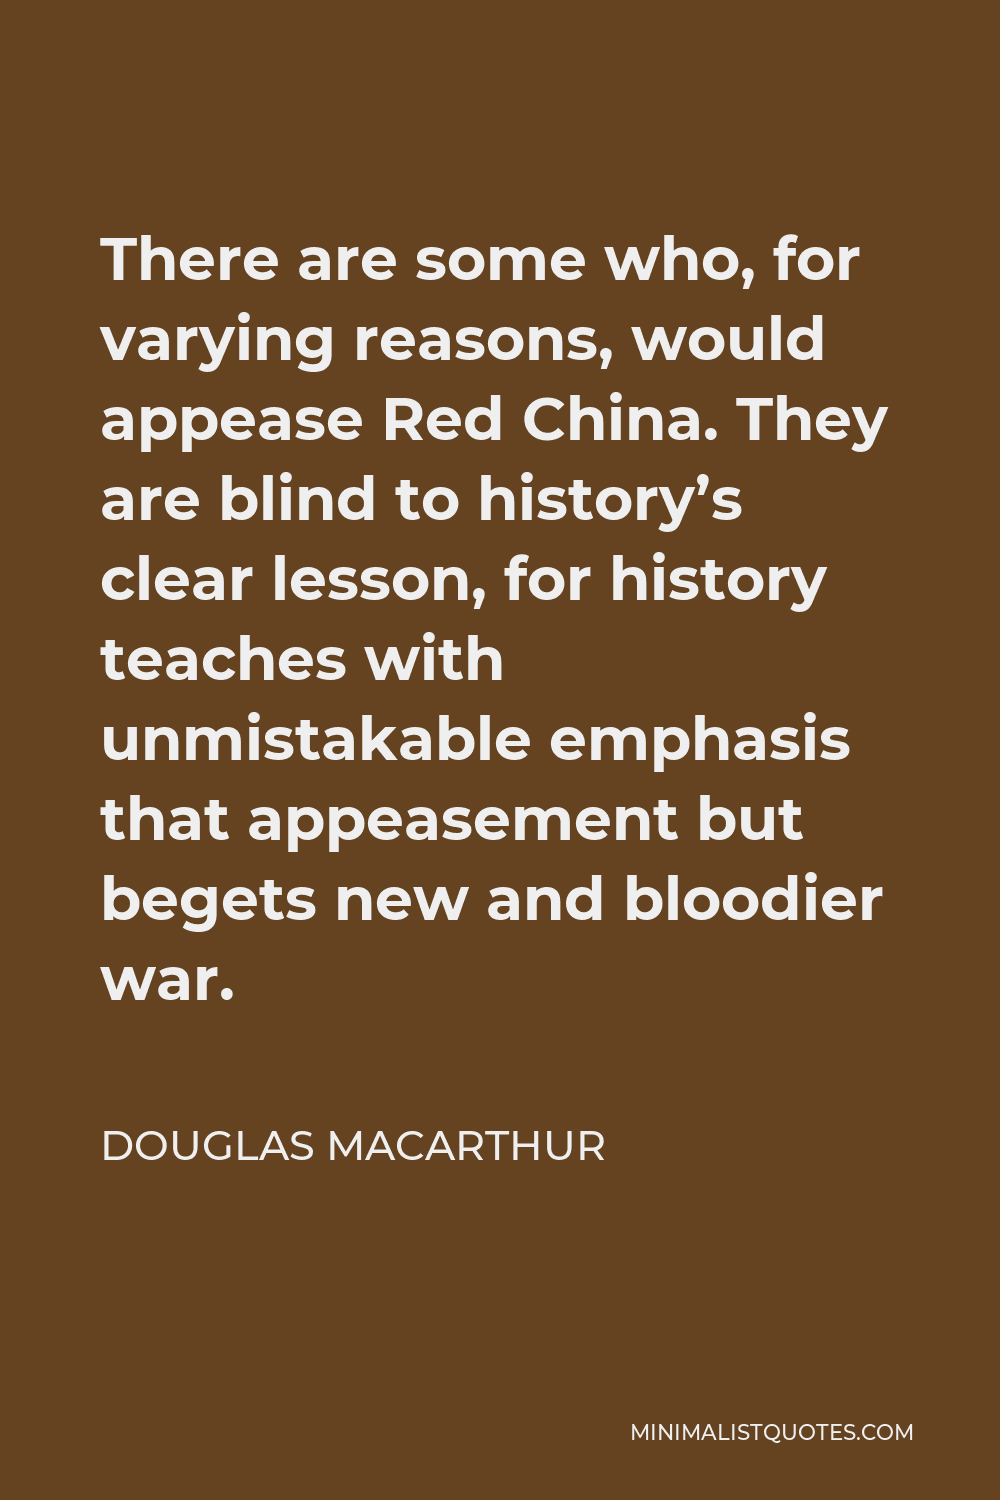 Douglas MacArthur Quote - There are some who, for varying reasons, would appease Red China. They are blind to history’s clear lesson, for history teaches with unmistakable emphasis that appeasement but begets new and bloodier war.